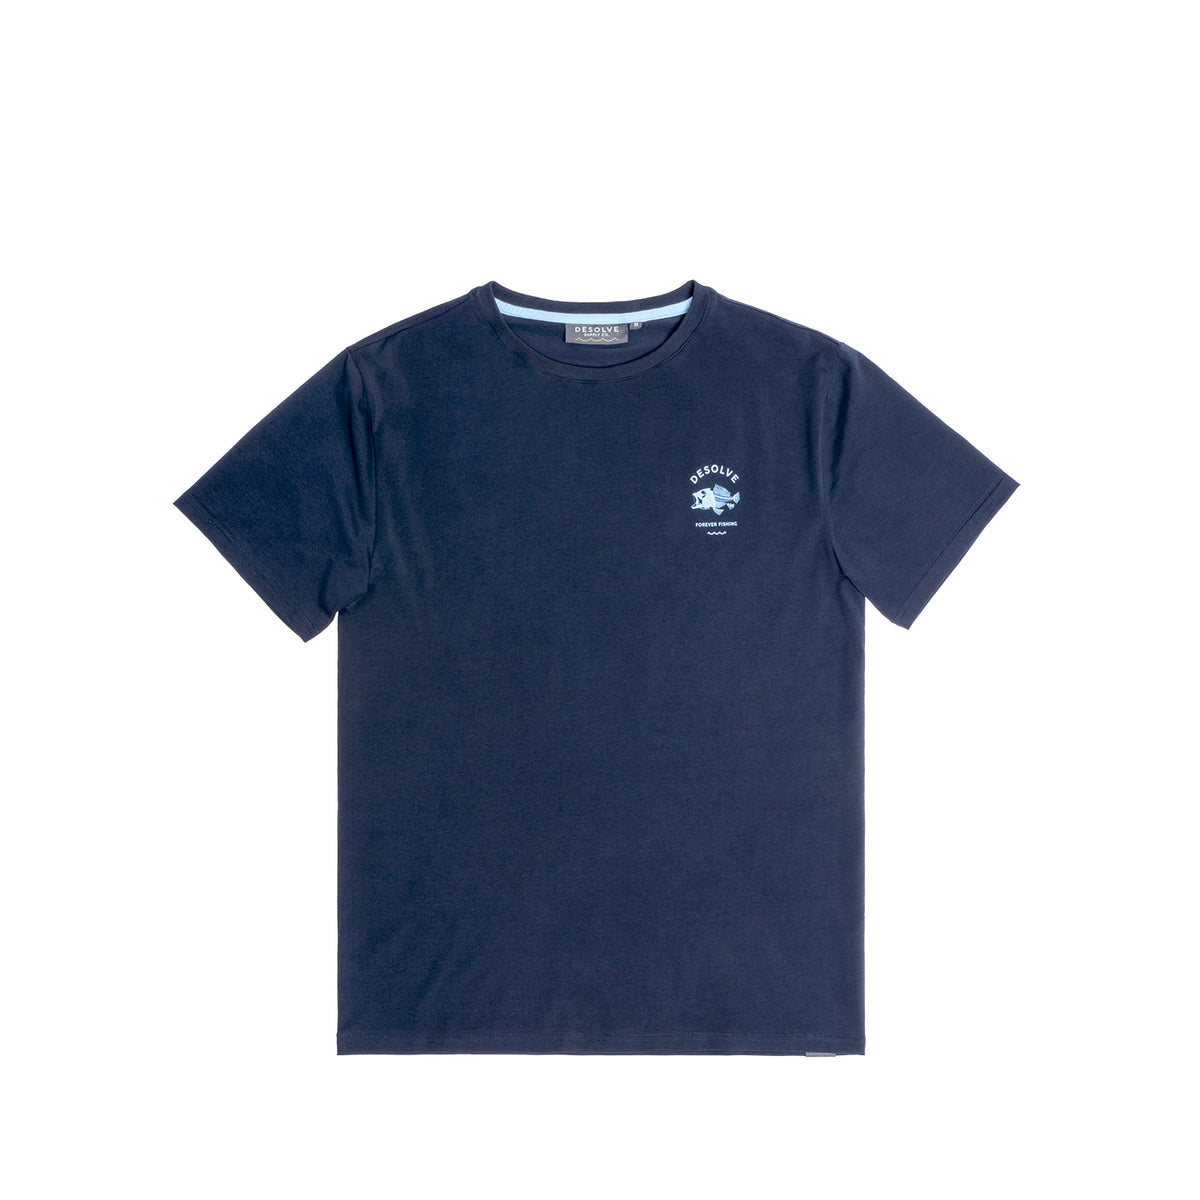 Desolve Supply Co | Scale Tee | UPF 50+ | Standard Fit Fishing T-shirt ...